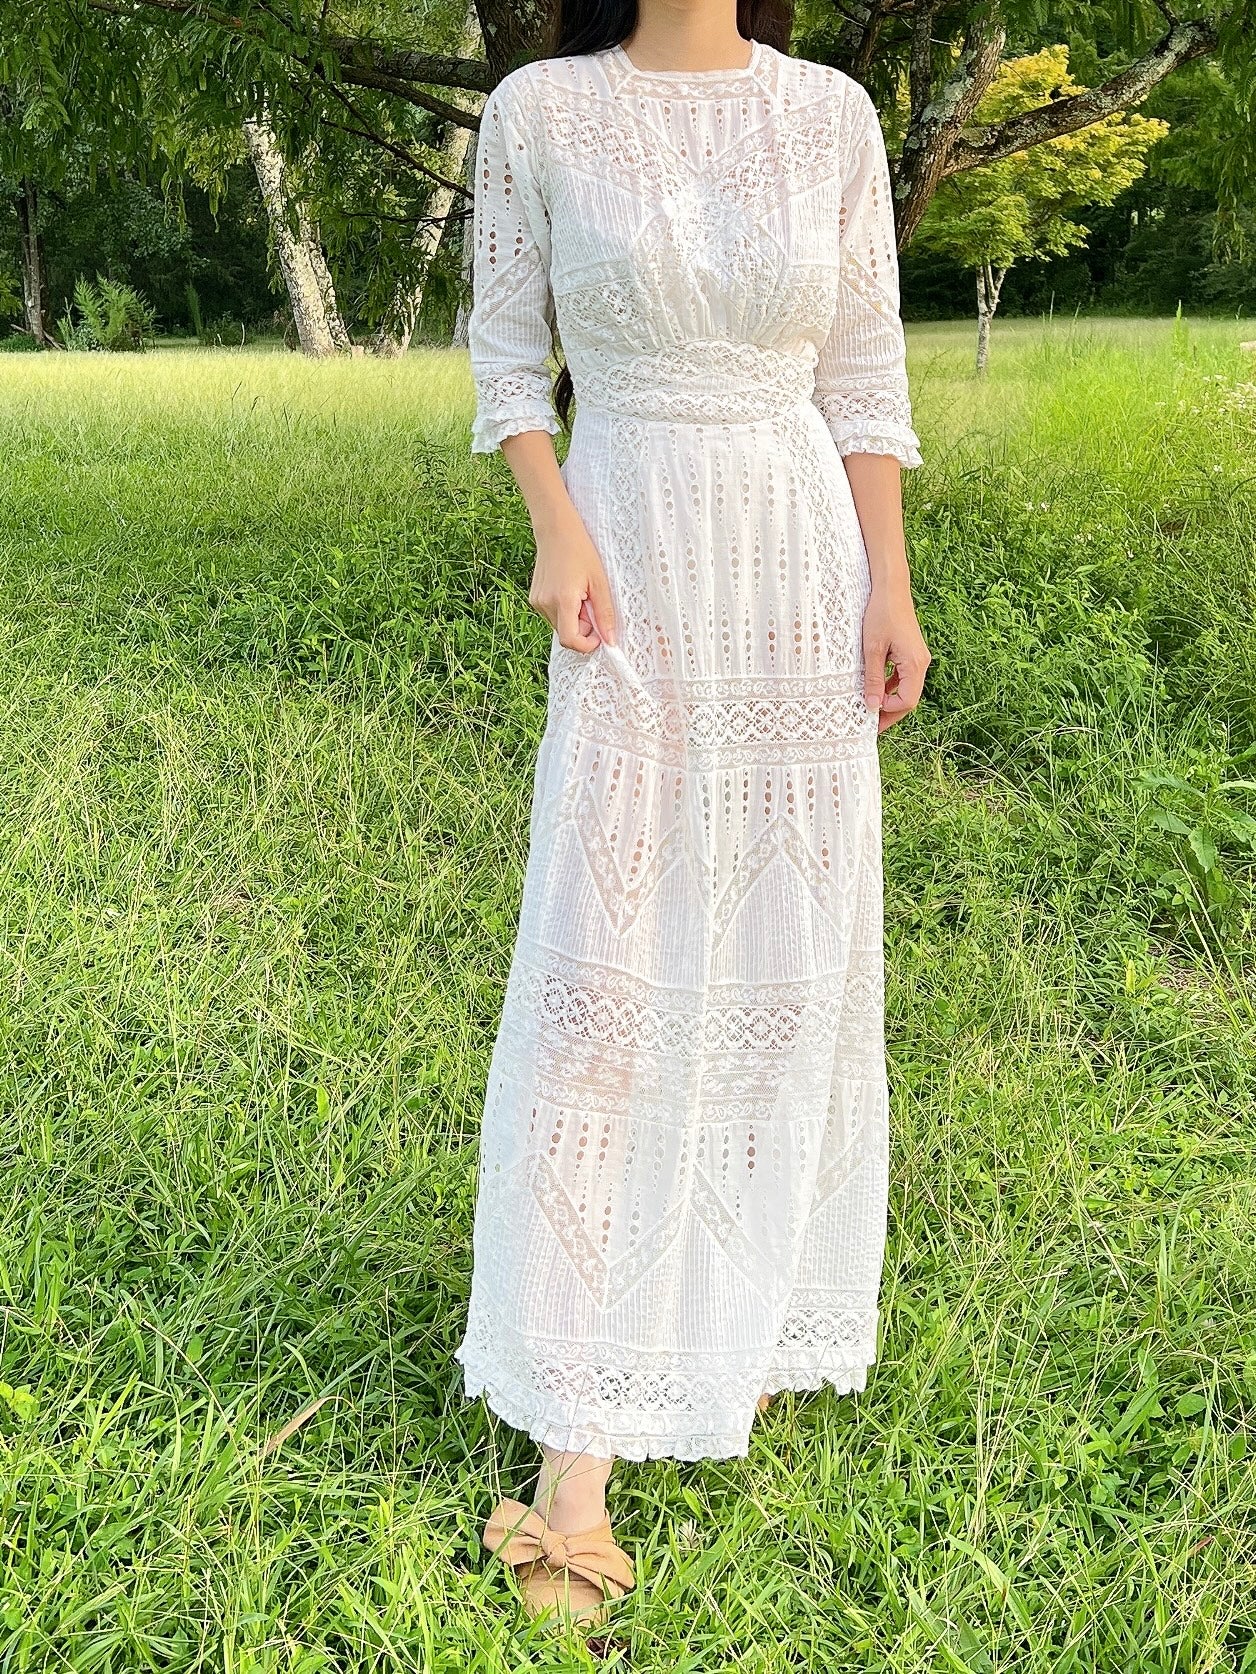 Antique Embroidered Cotton Lawn Dress - XS